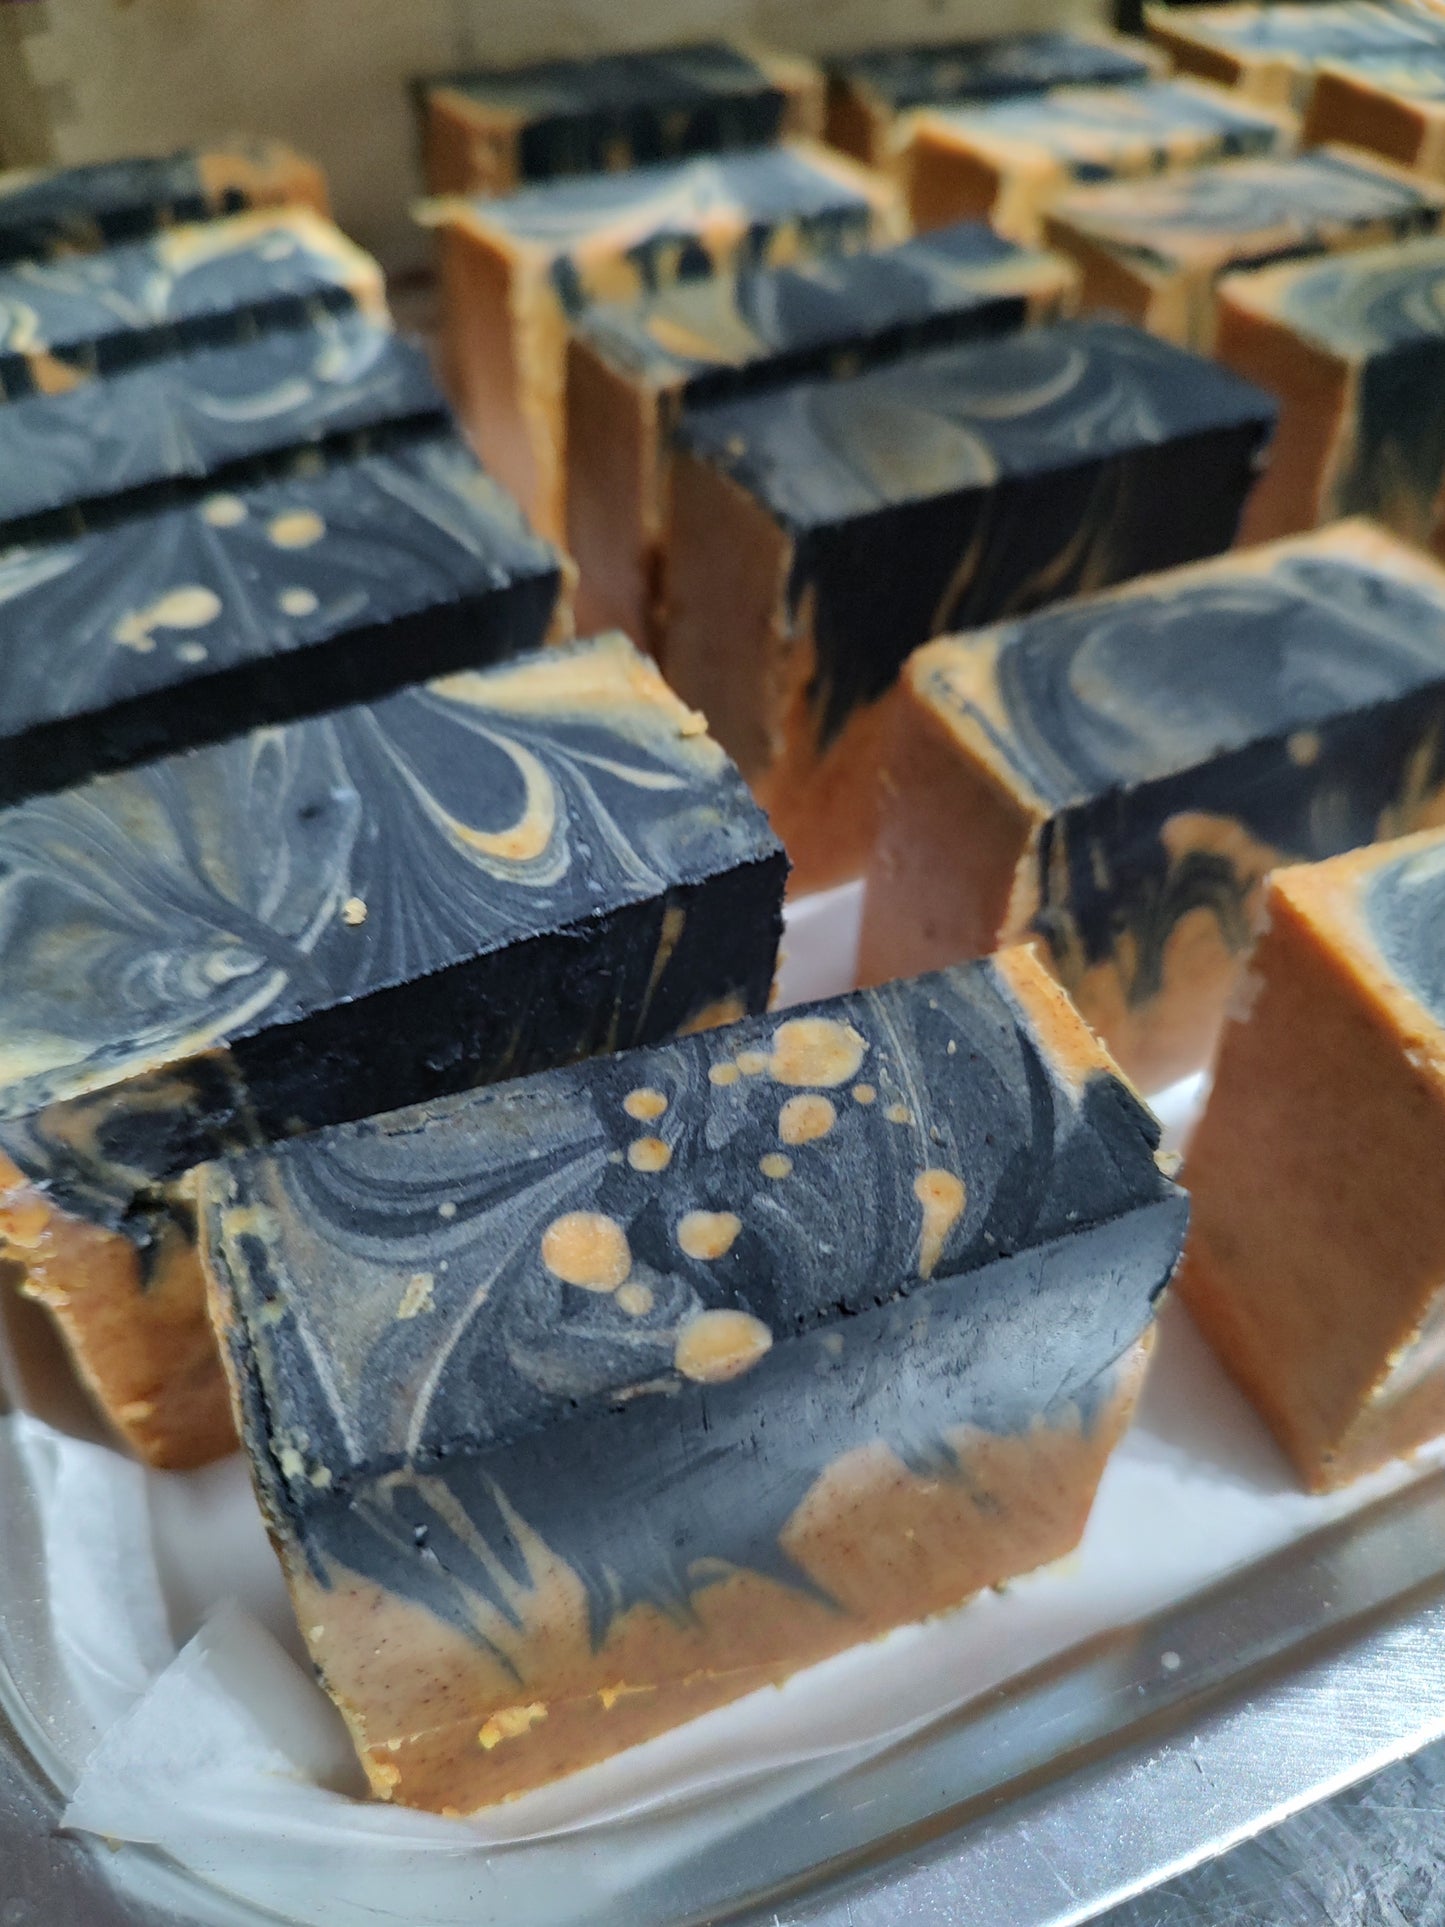 Turmeric, Honey, and Charcoal Swirl Soap Bars - AVAIILABLE APRIL FIRST